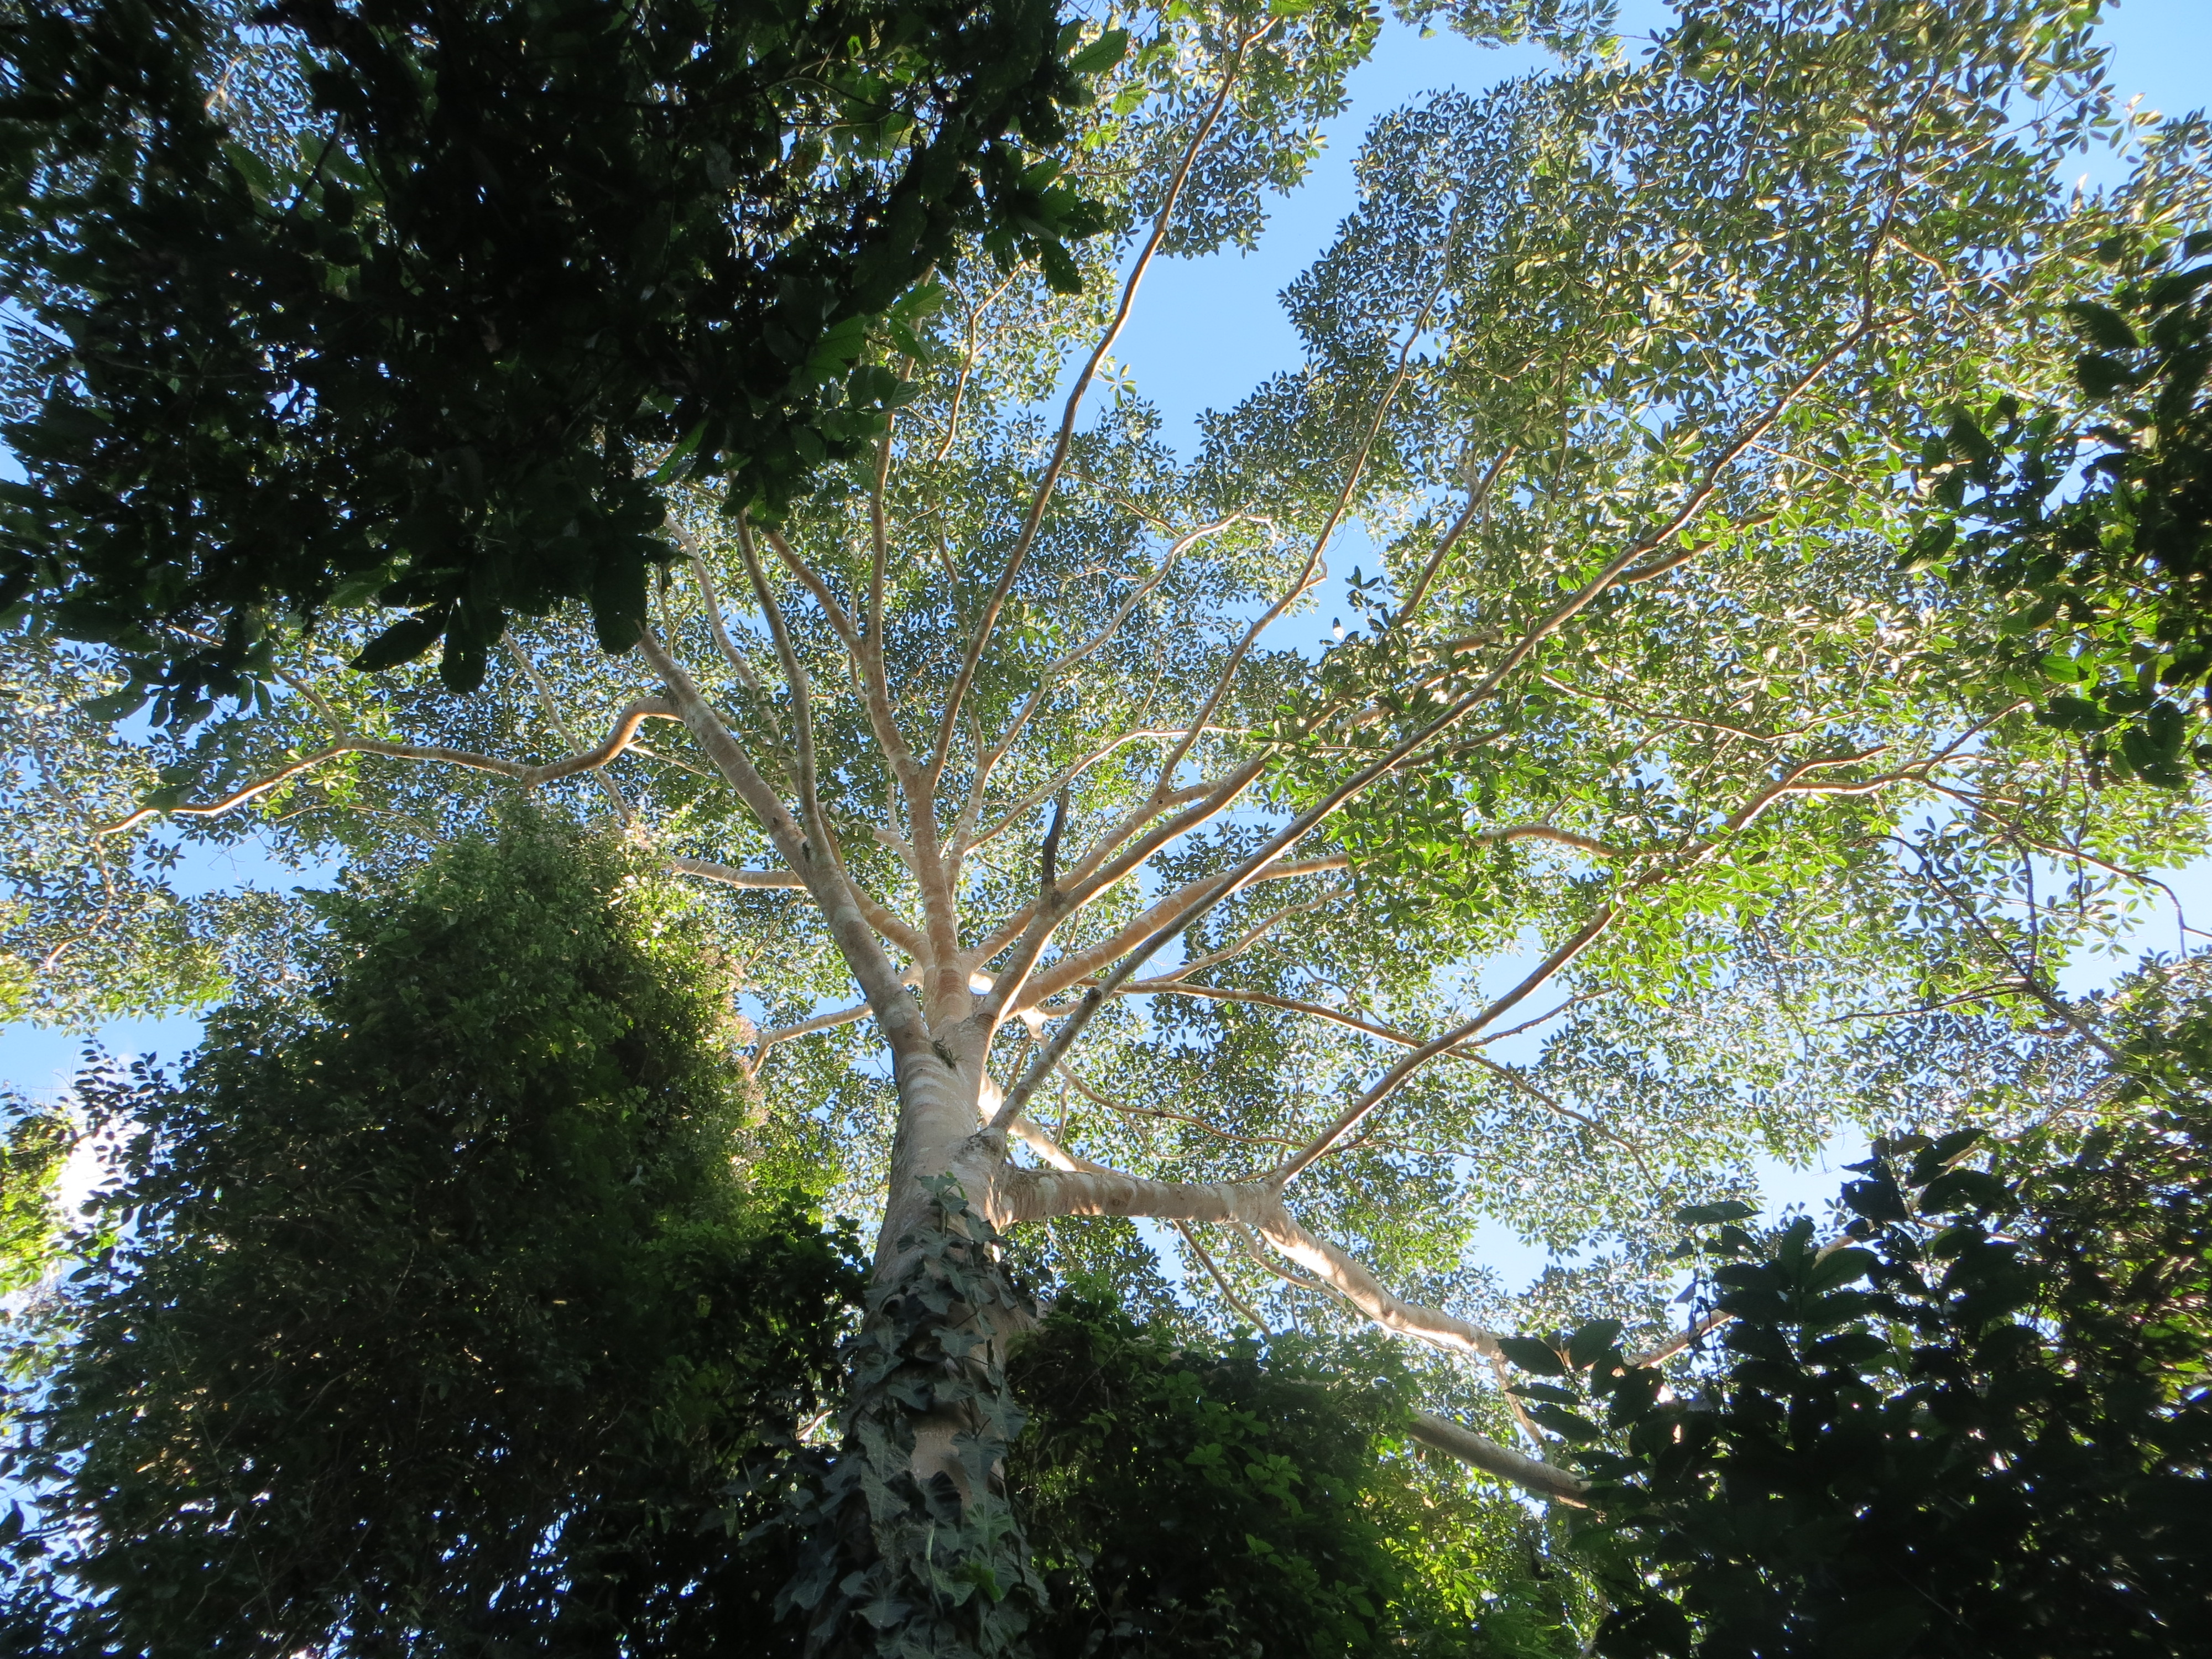 Photo looking up through the canopy of a Peruvian forest with multiple plant types; blue sky is visible among the leaves, branches, vines, and trunks.